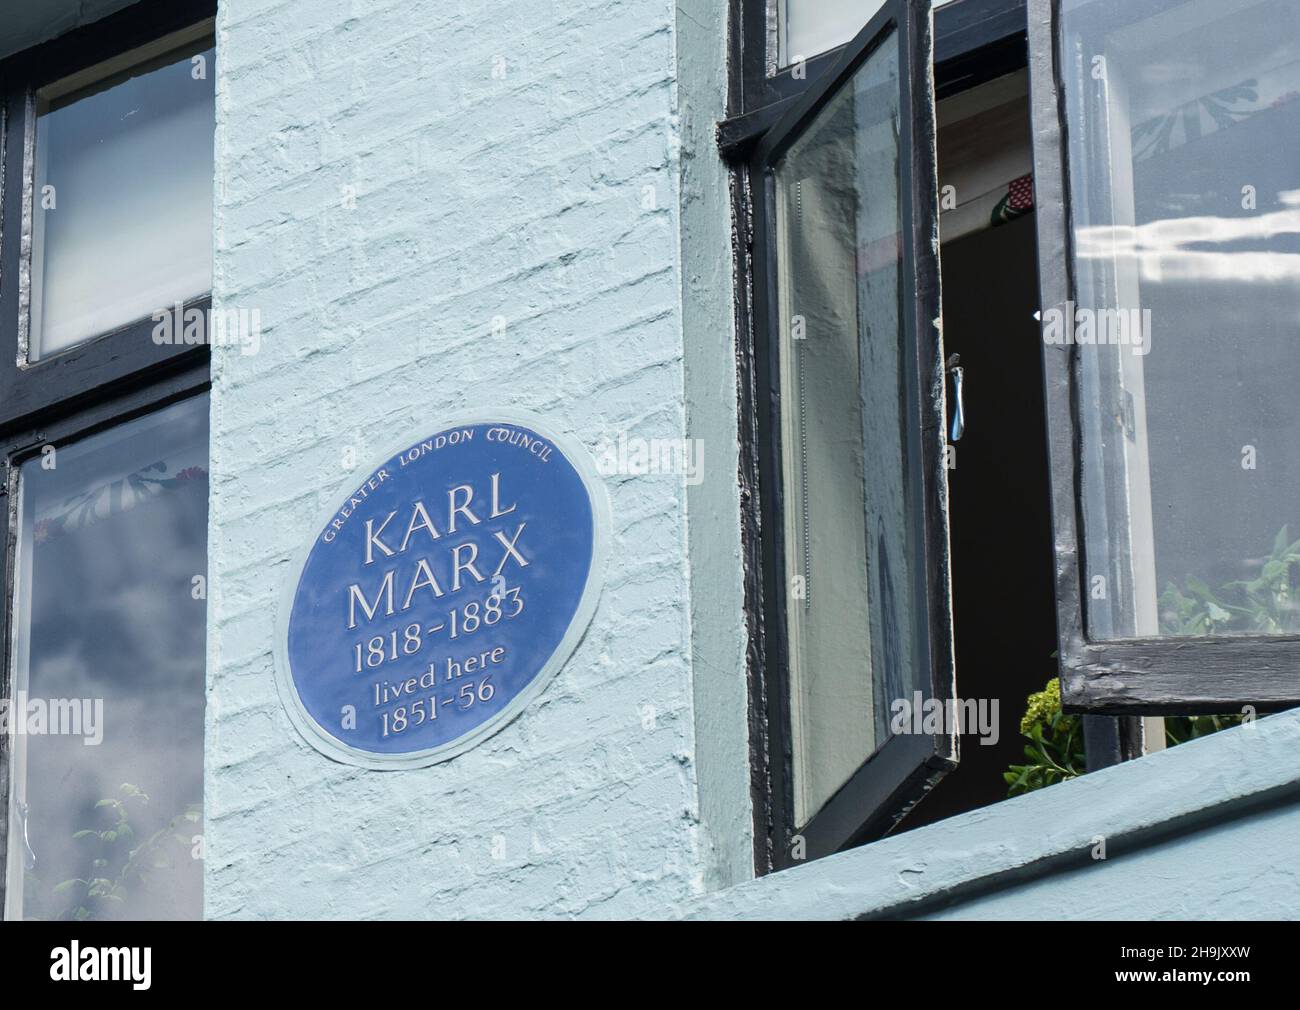 Views of the blue plaque where Karl Marx lived between 1851 and 1856 at 28 Dean Street, London. It is the 200th anniversary of Marx's birth on May 6, 2018. Photo date: Wednesday, May 2, 2018. Photo credit should read: Richard Gray/EMPICS Stock Photo